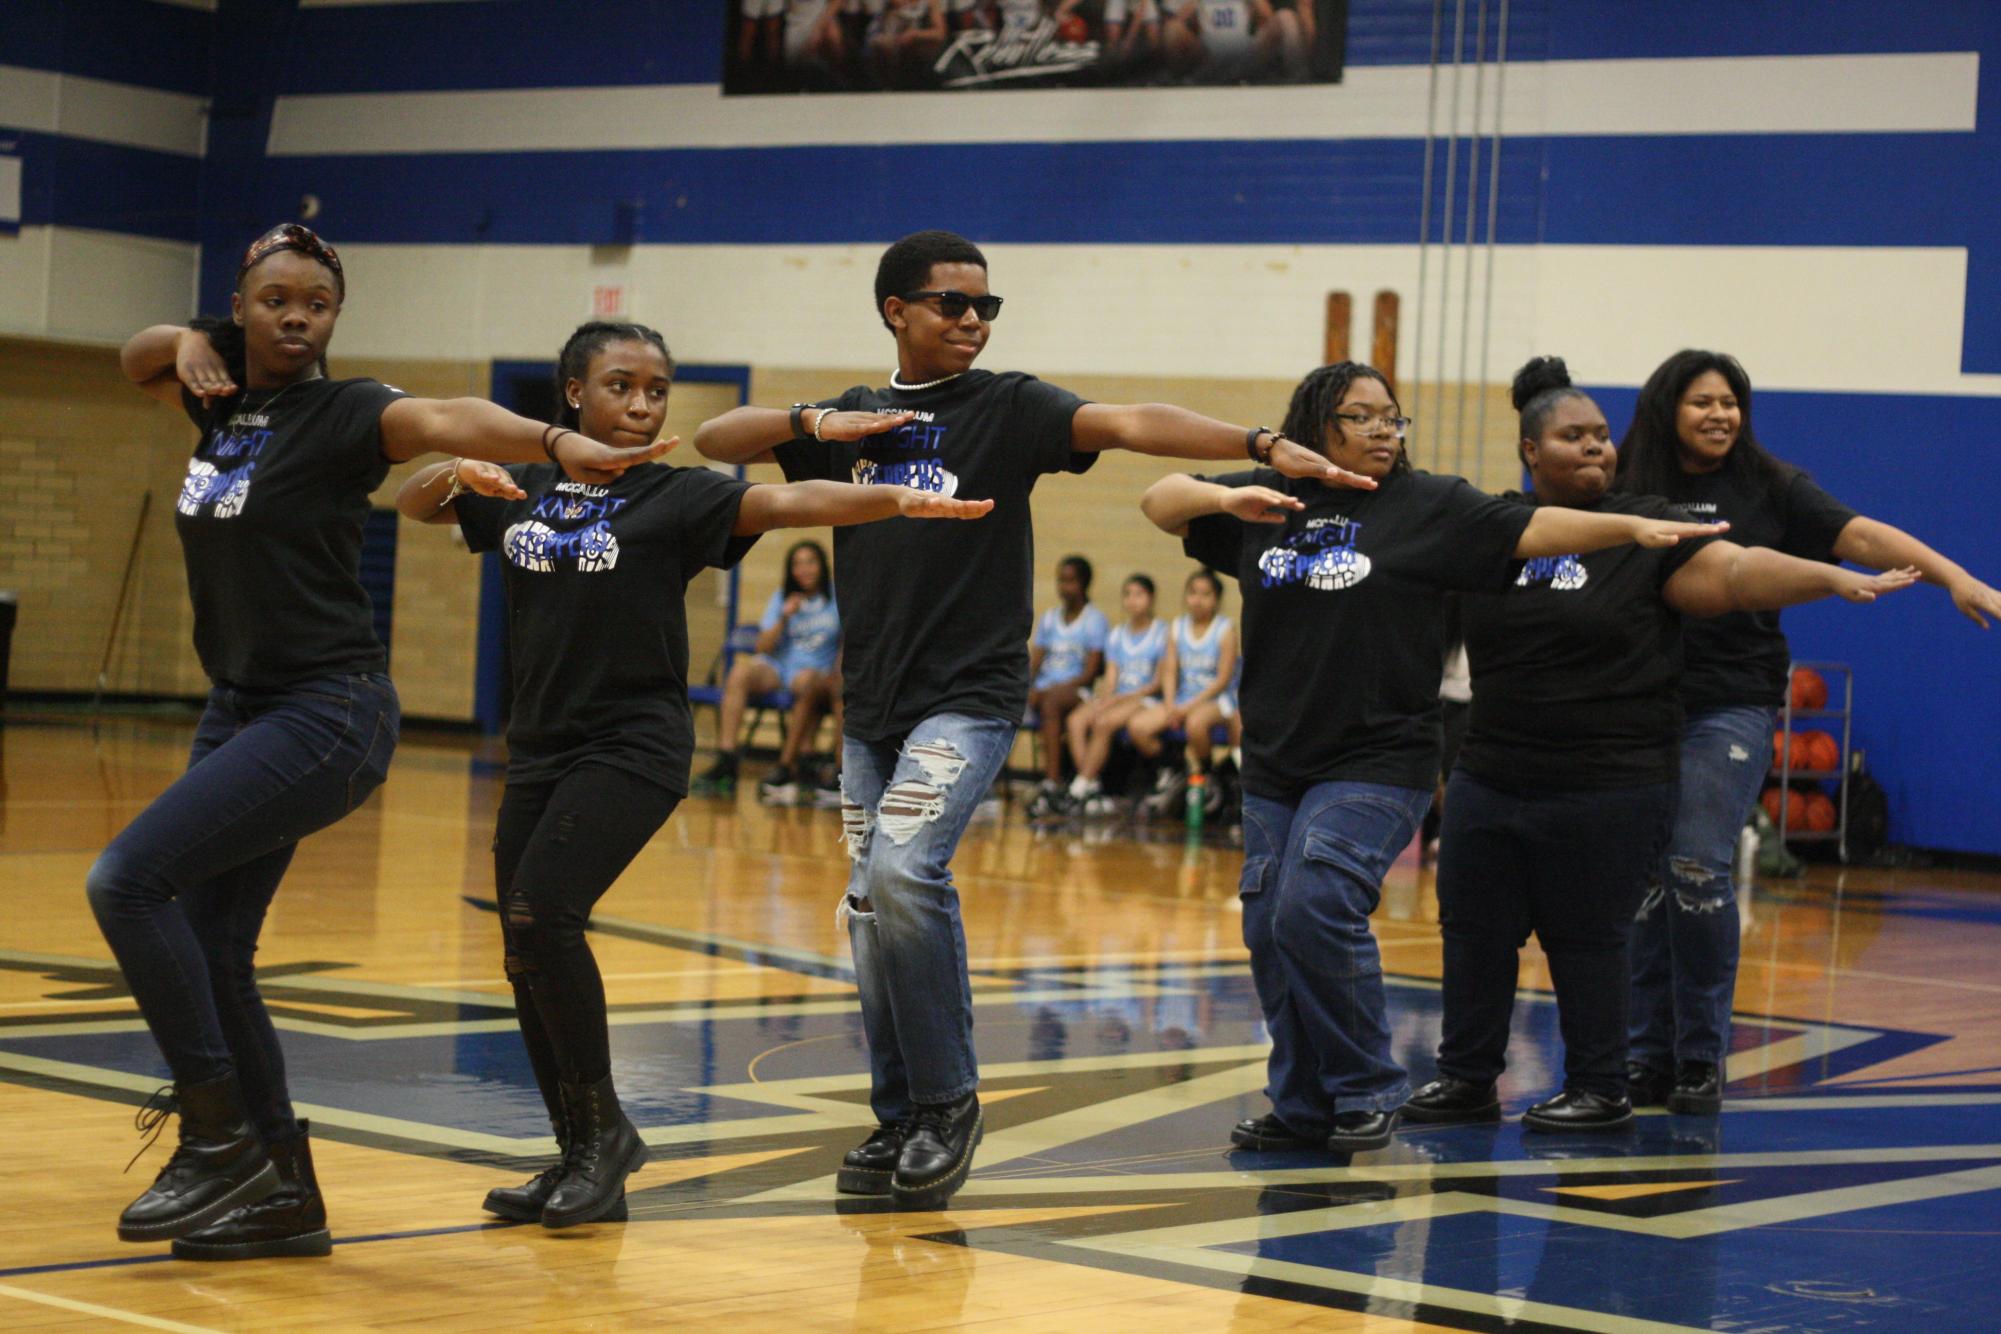 No. 4 — The Knight Steppers performed at halftime of the game.